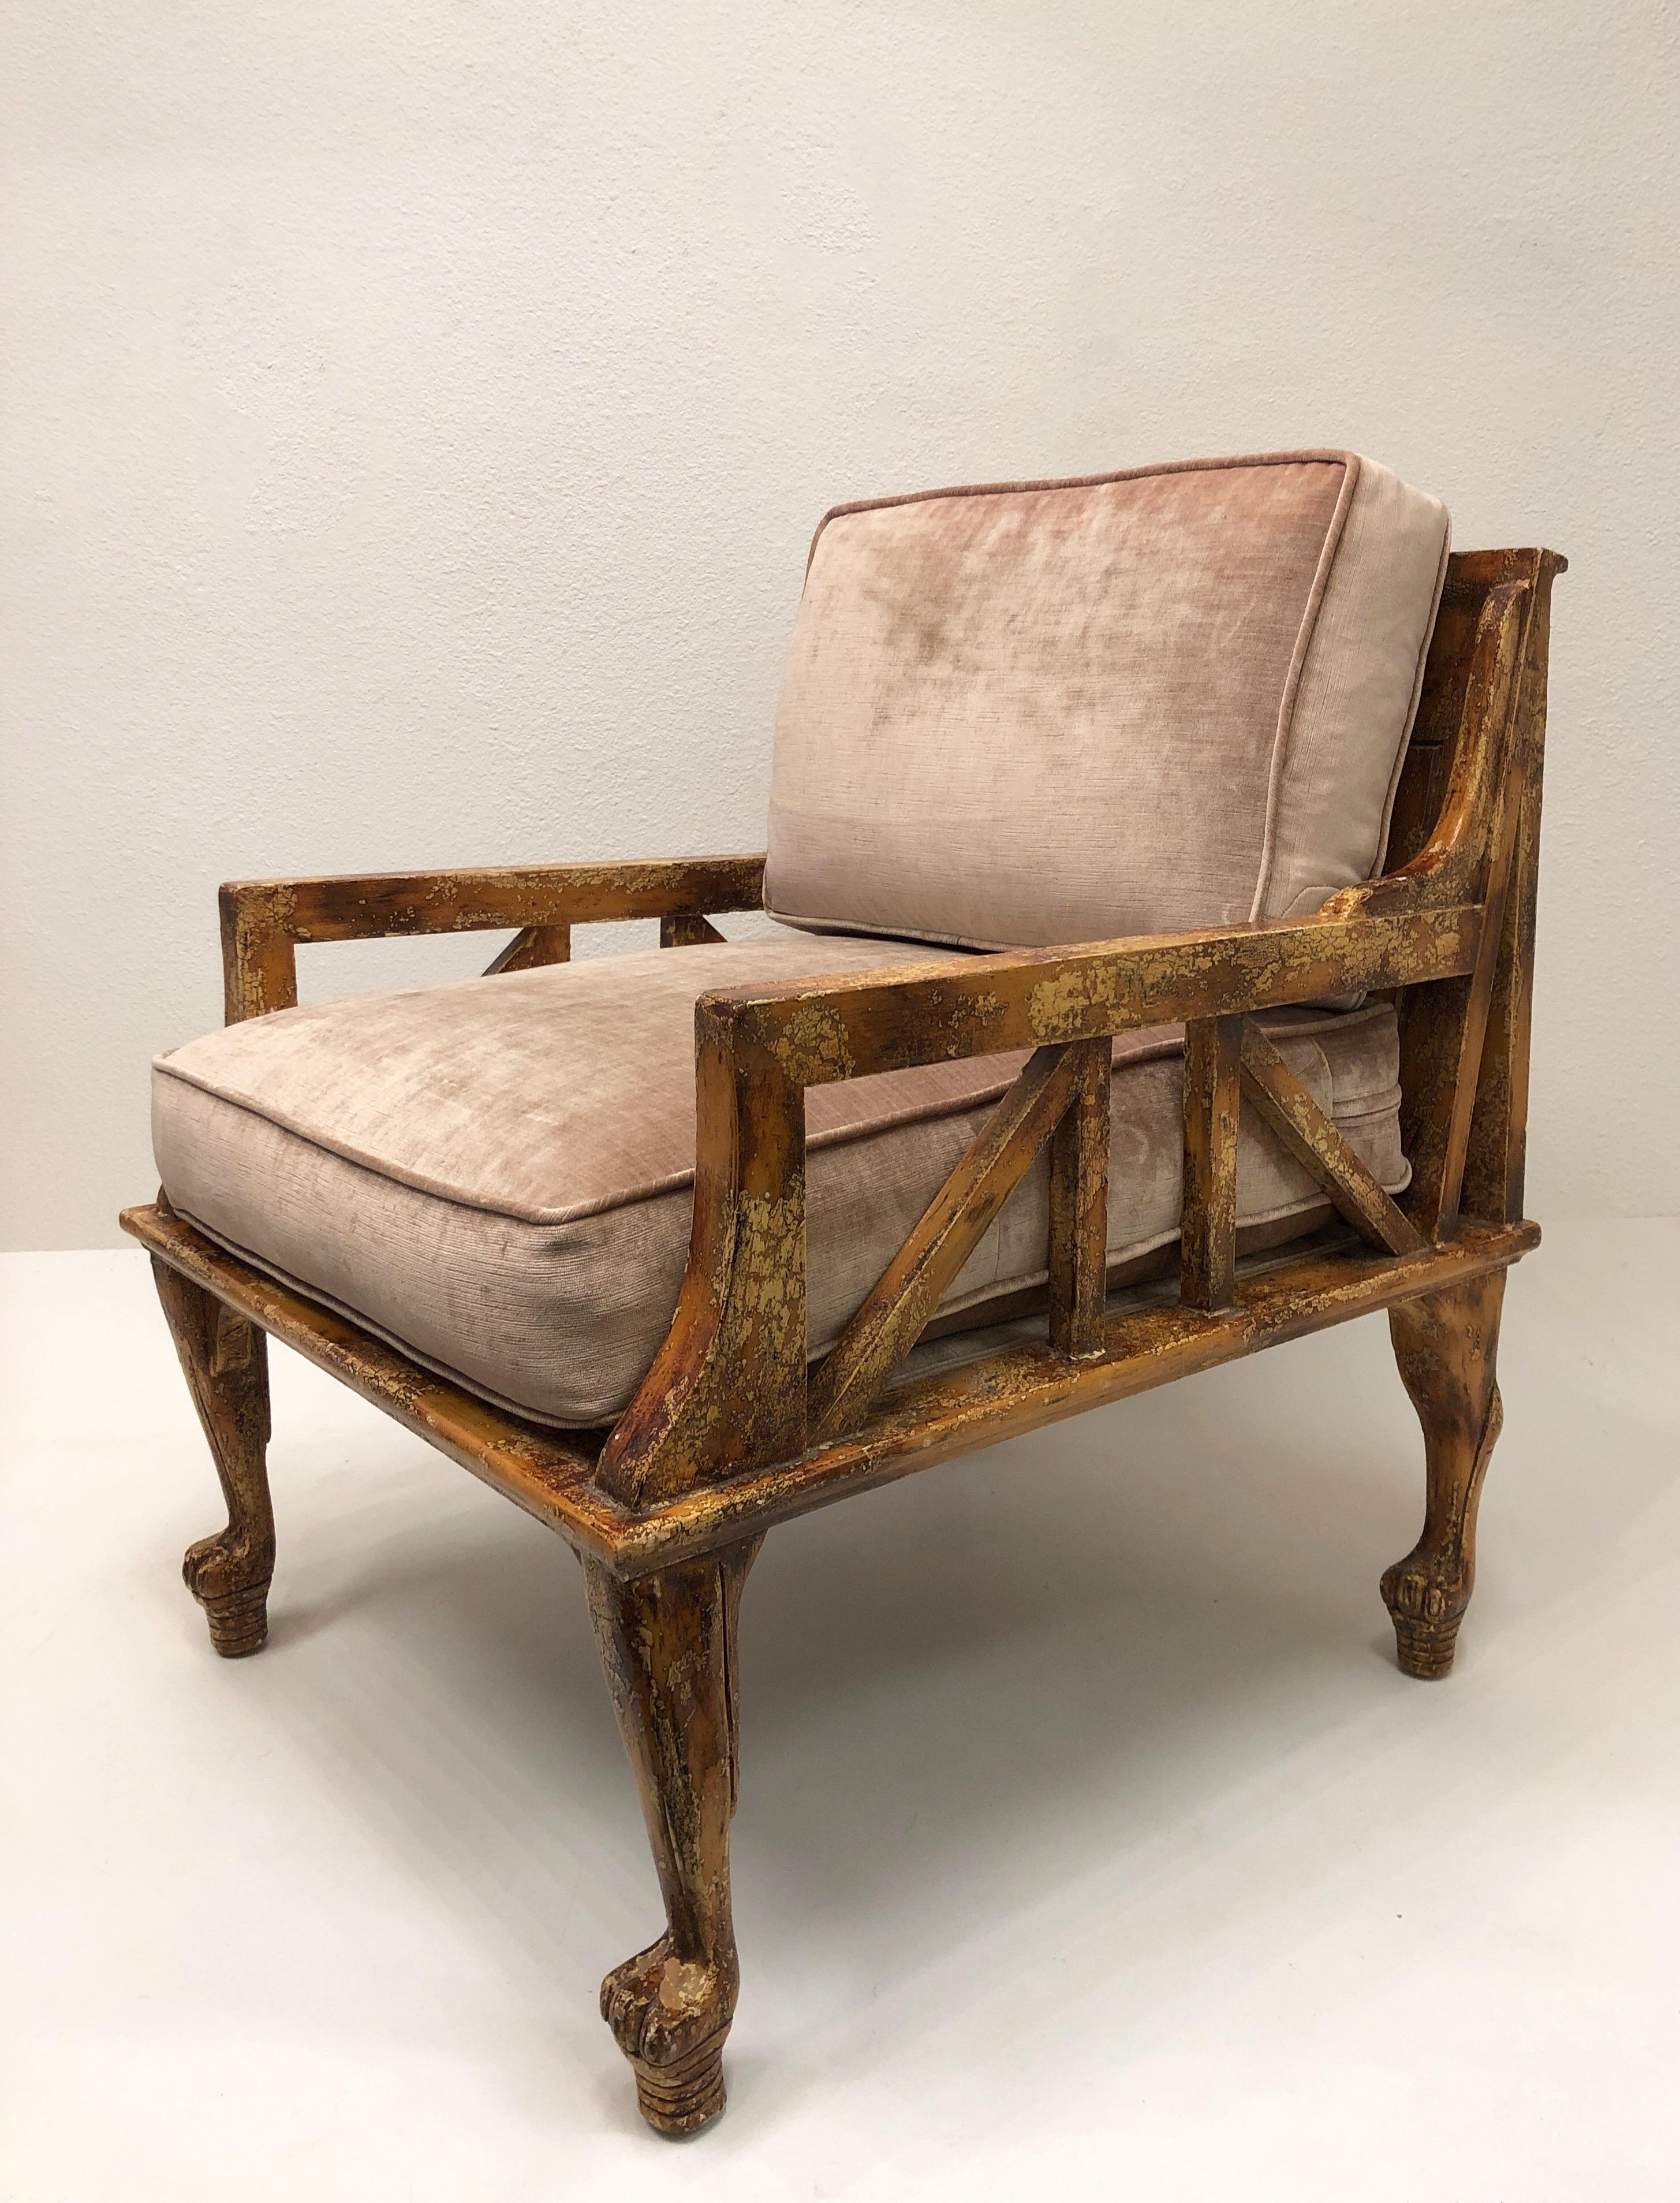 Hand-Crafted Pair of Thebes Club Chairs by Randolph & Hein for Steve Chase For Sale